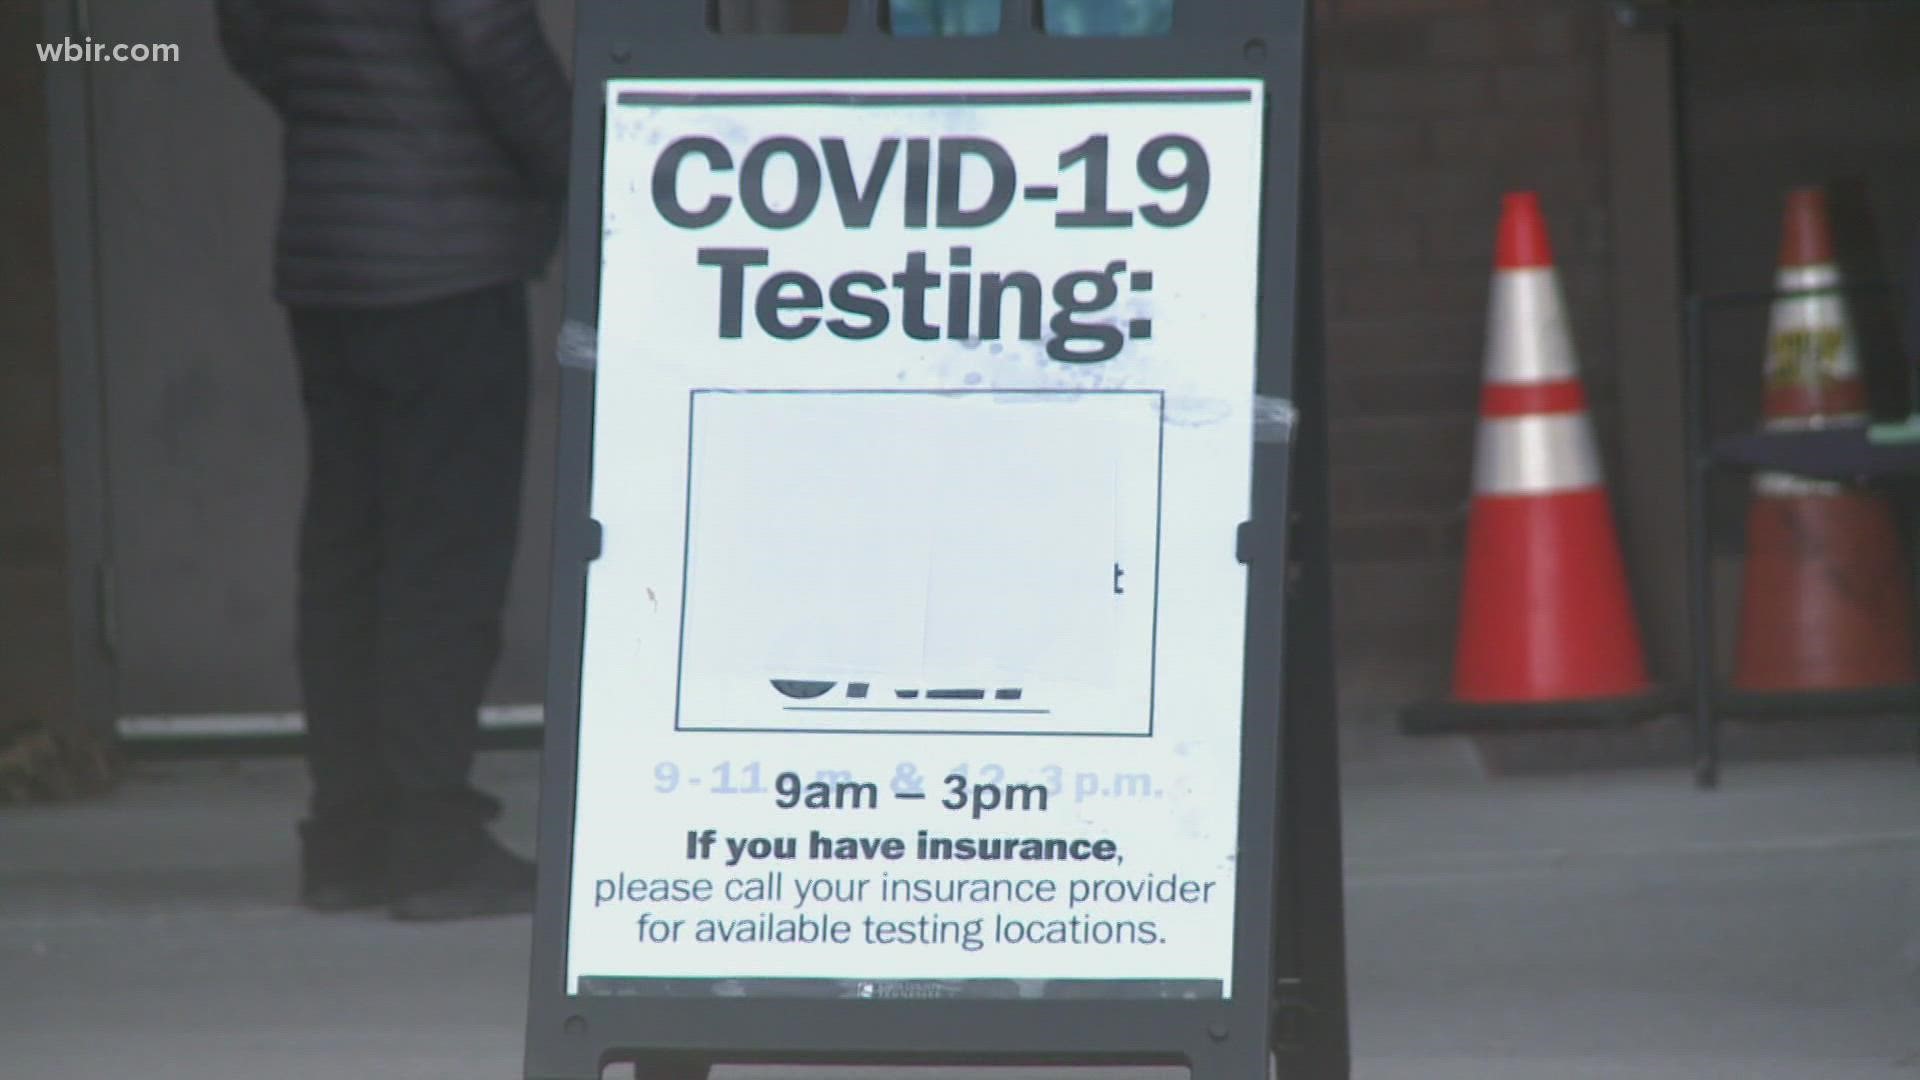 The Knox County Health Department expanded testing to anyone who walks up to their main location in Knoxville.